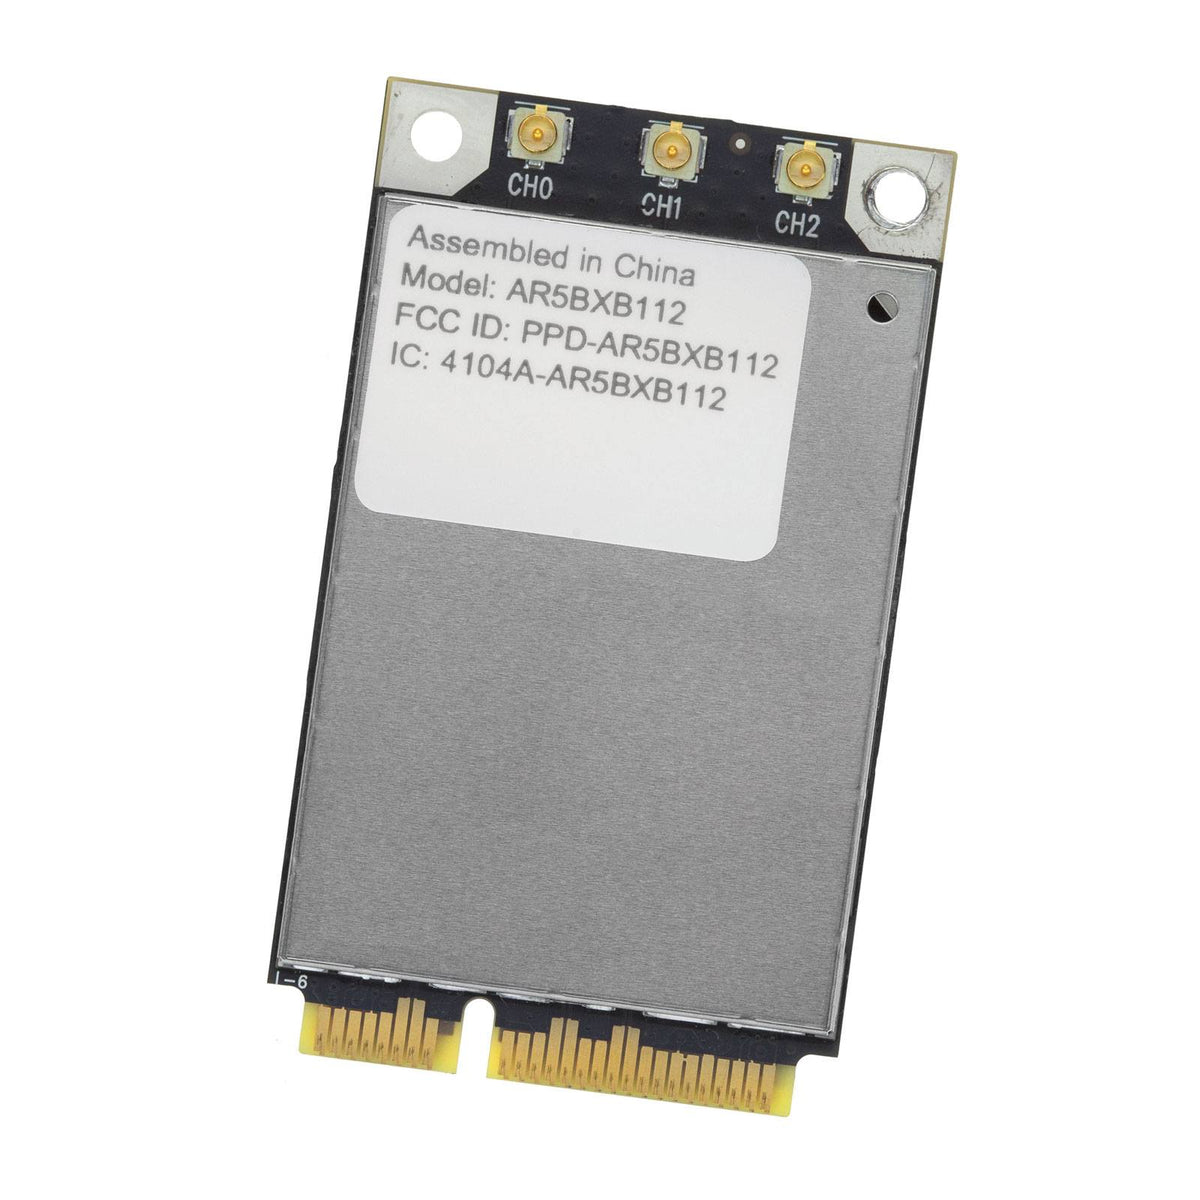 AIRPORT WIRELESS NETWORK CARD FOR IMAC 21.5" A1311 (LATE 2011) #AR5BXB112